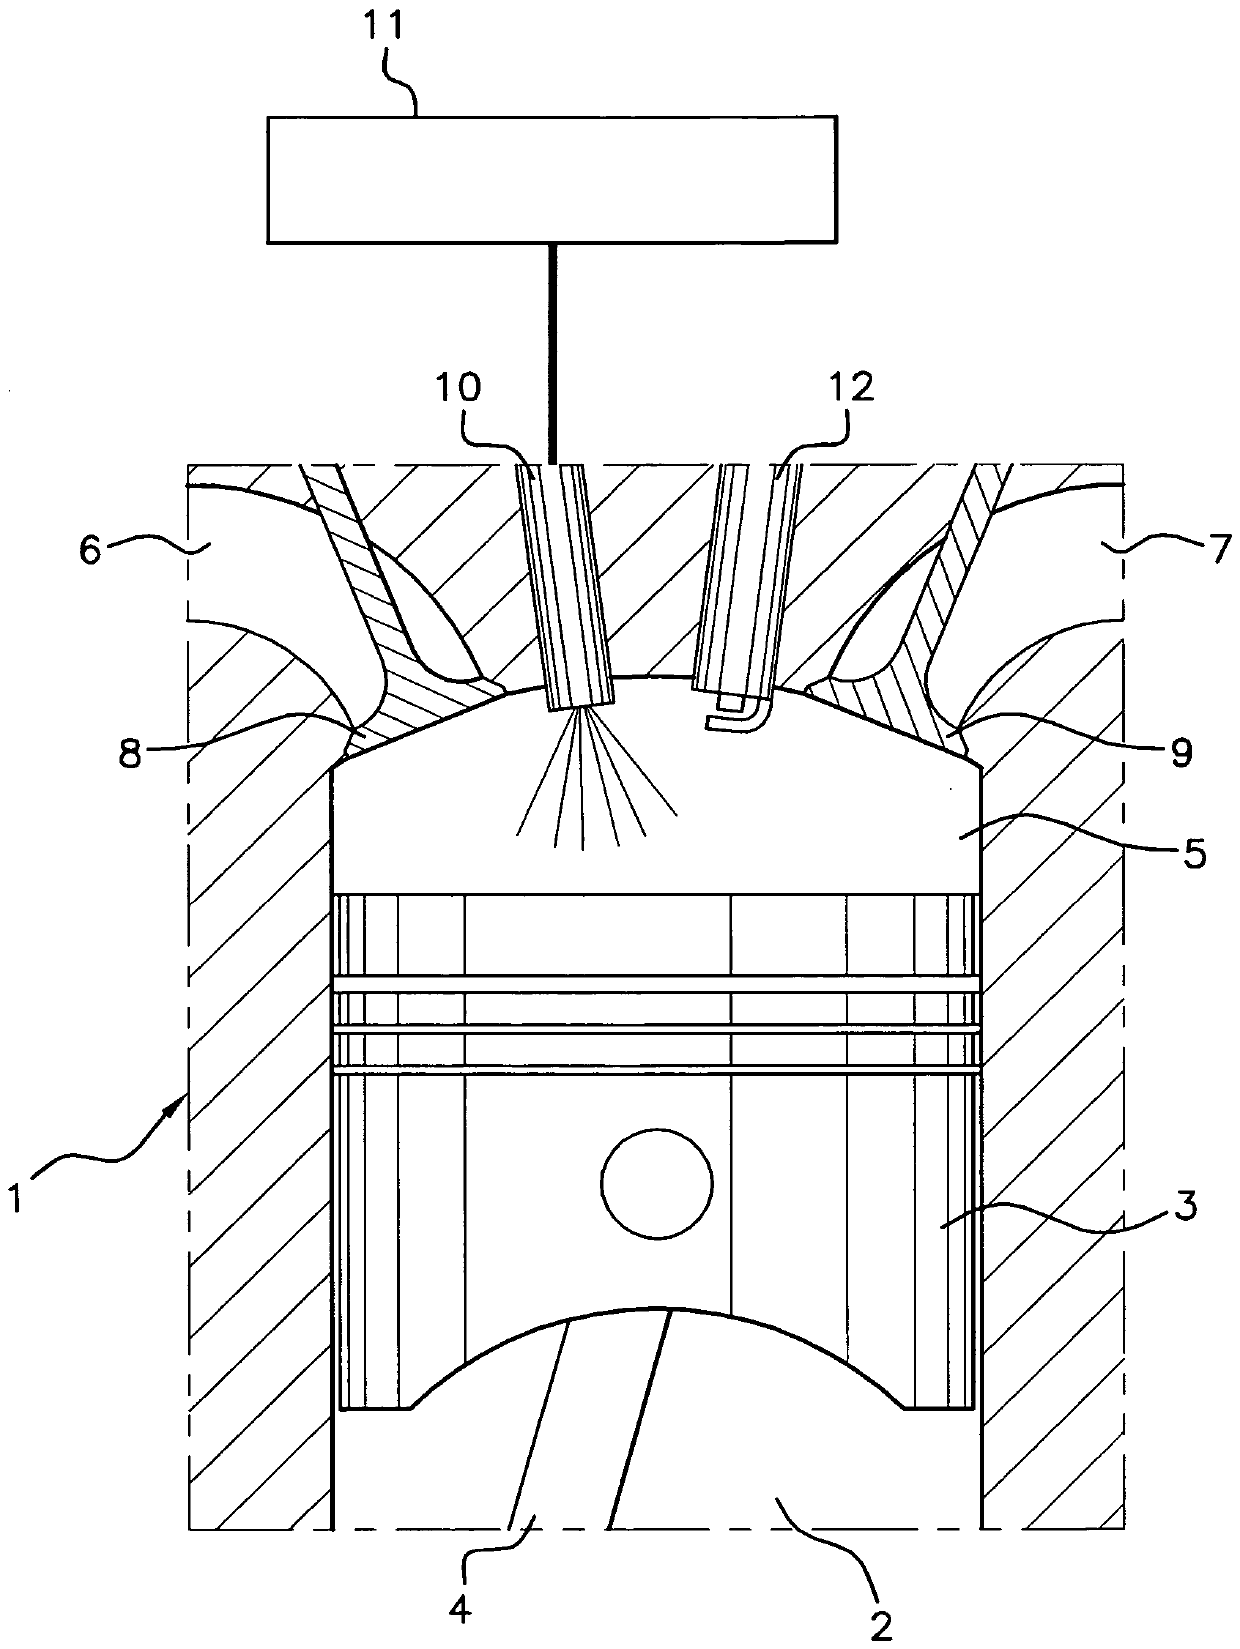 Method for cleaning injectors of a direct-injection controlled-ignition engine